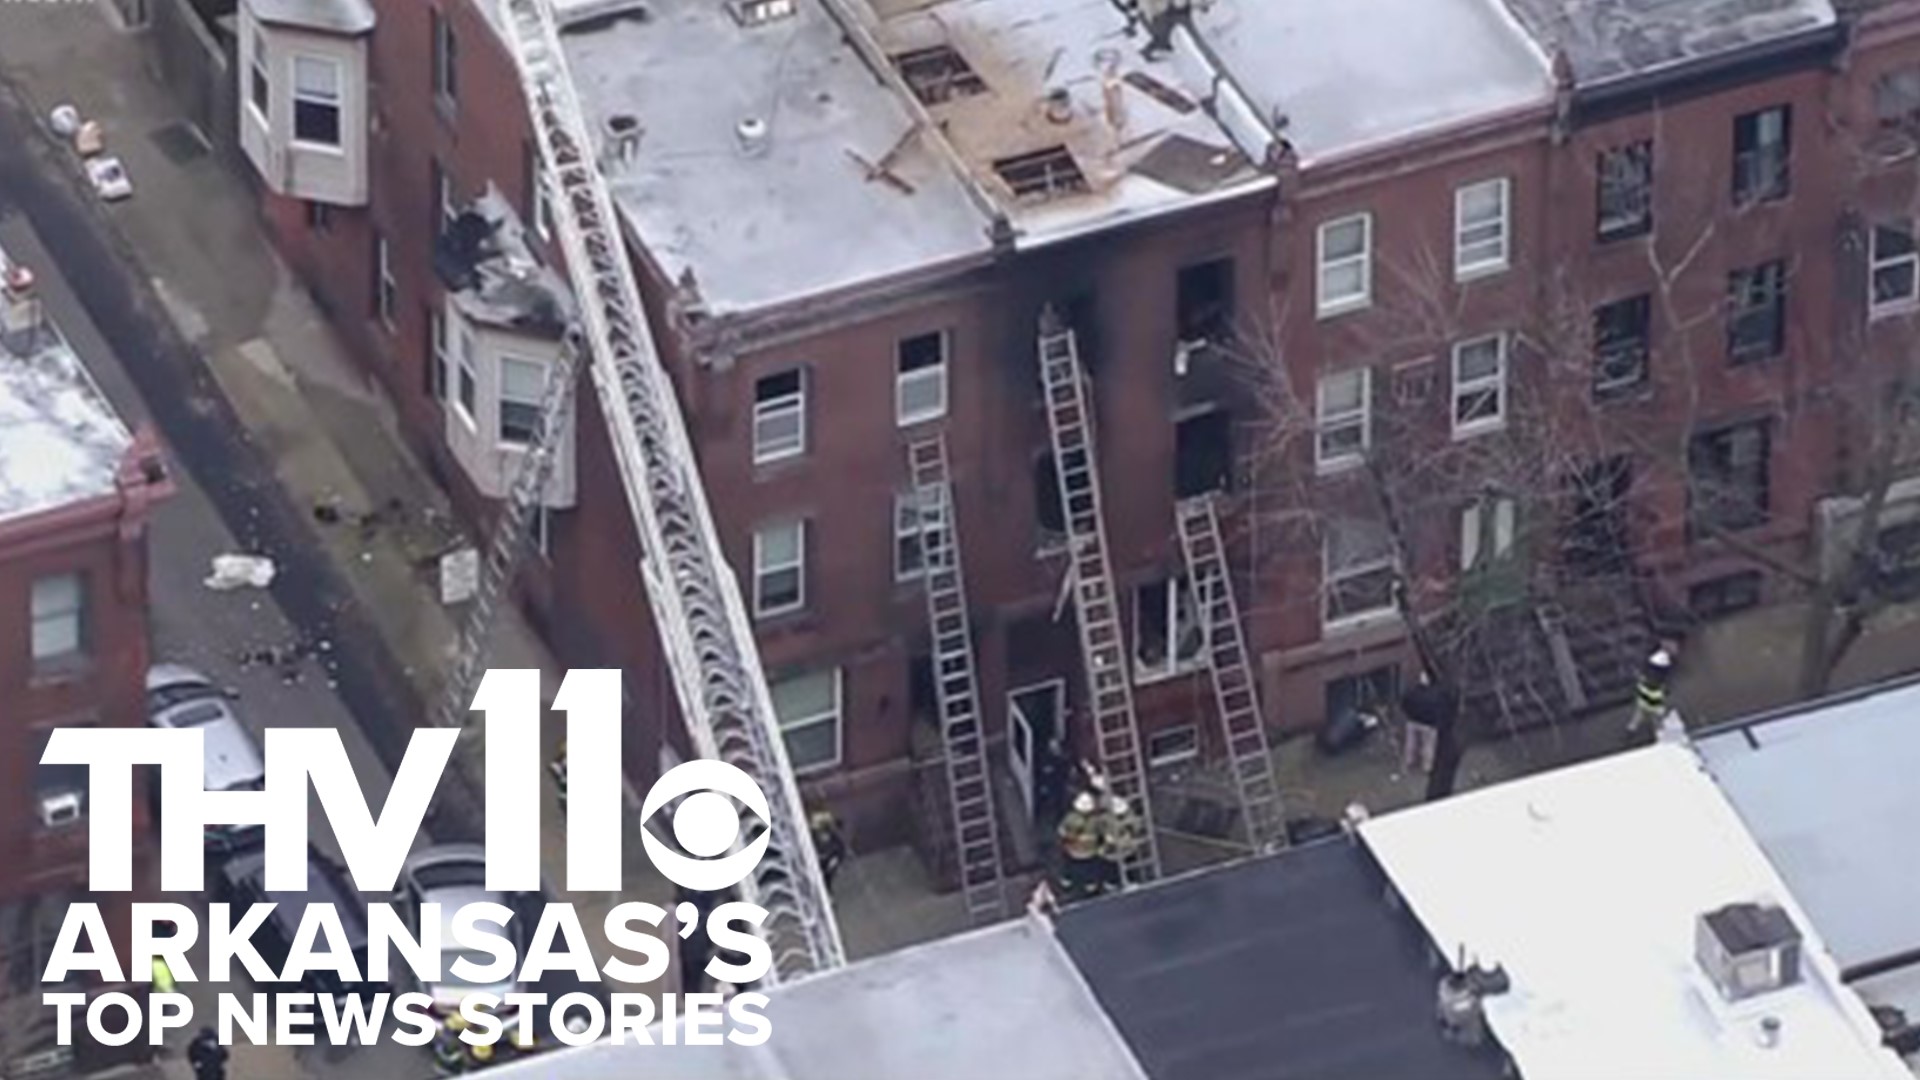 Michael Aaron delivers the latest news for Jan. 5, 2022, including the latest on an an early morning fire in Philadelphia that killed 13 people.